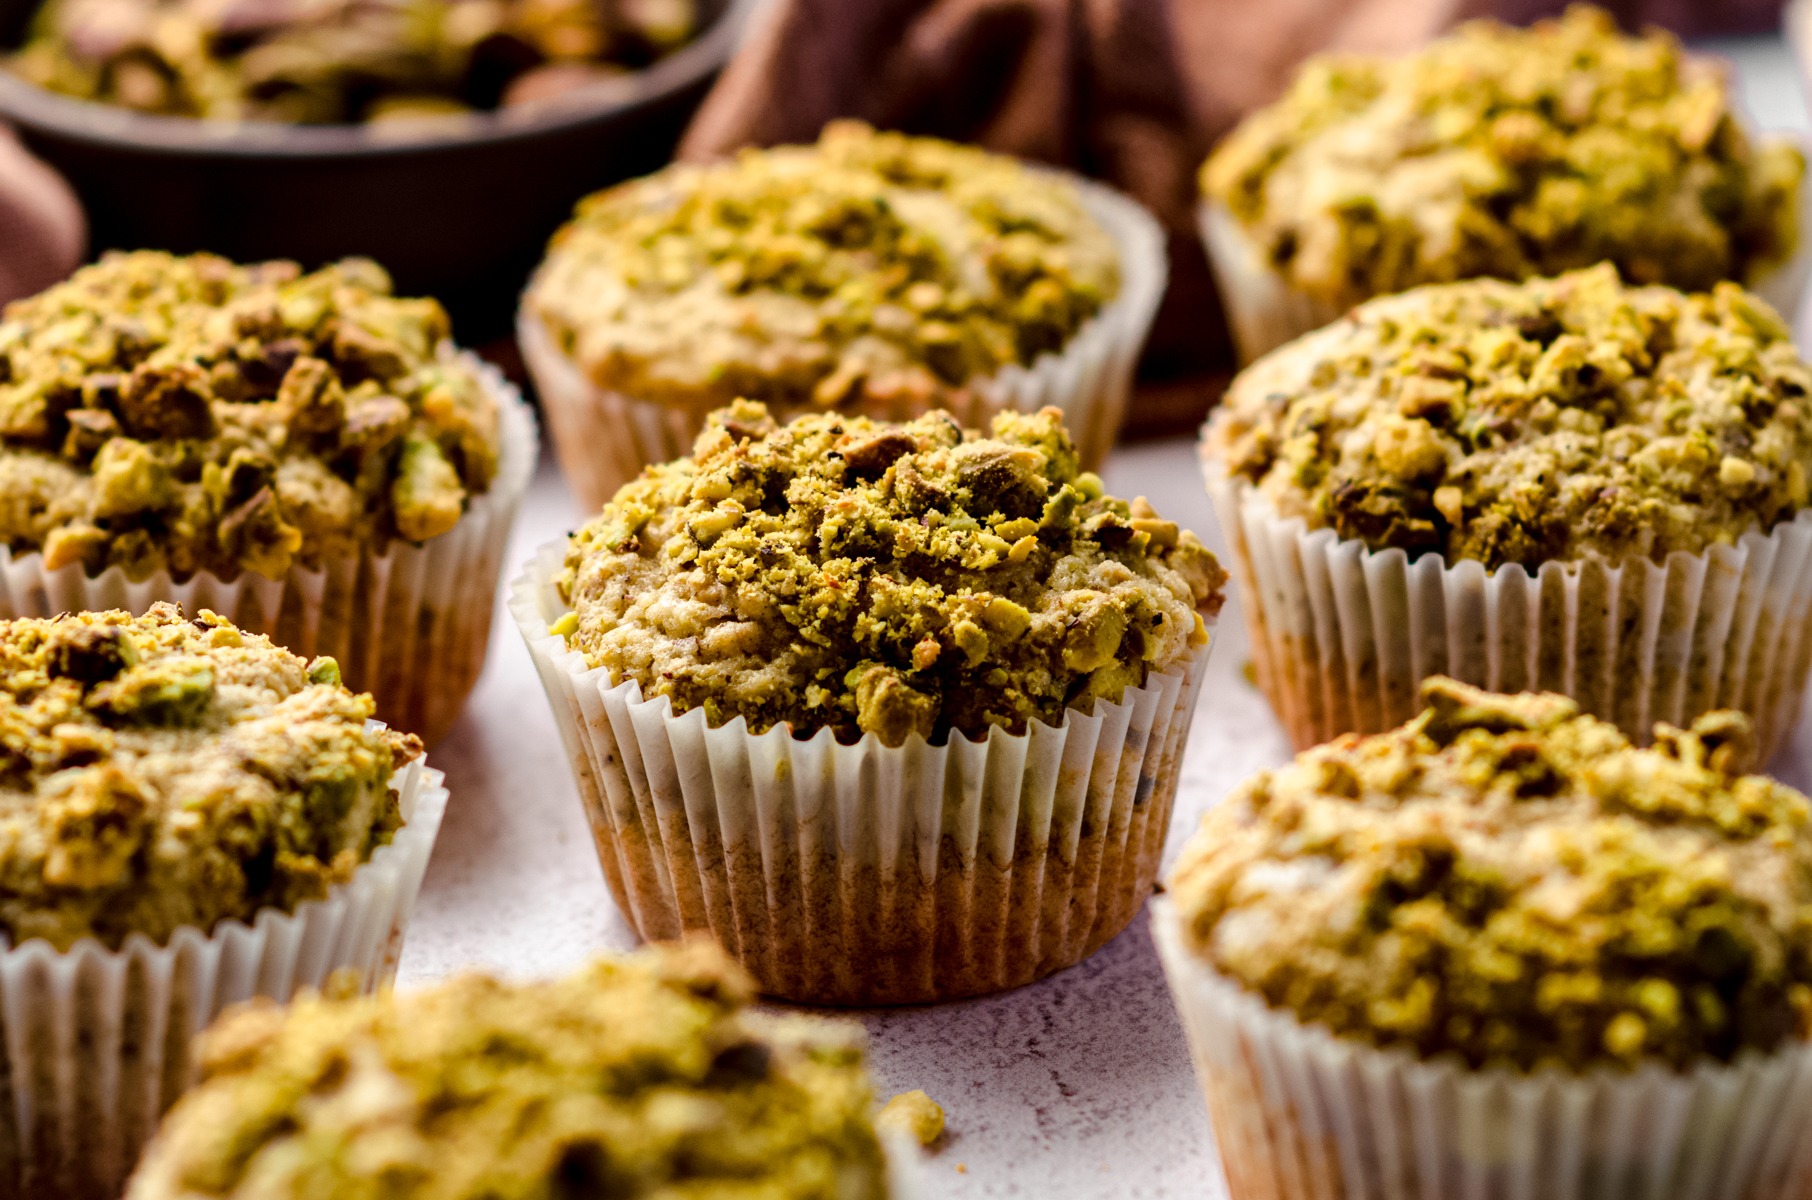 Pistachio muffins on a surface.